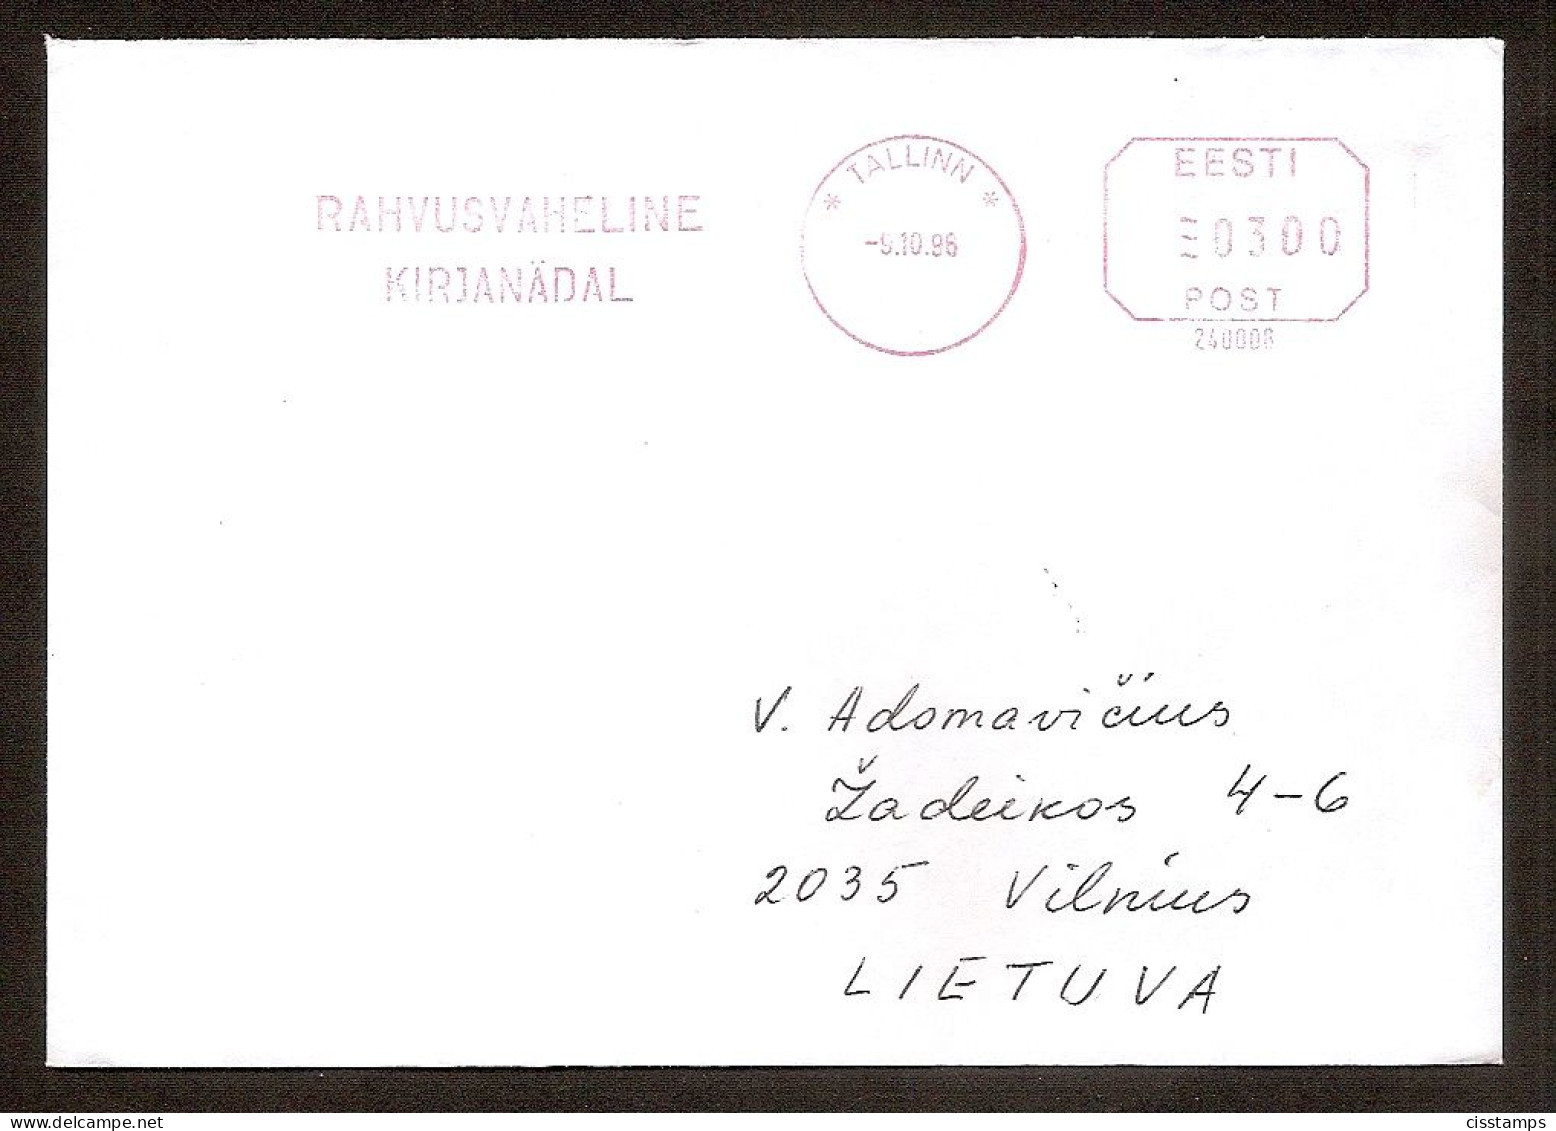 Estonia 1996●PITNEY BOWES Meter Stamp●Letter Writing Week●Cover To Lithuania - Estonia